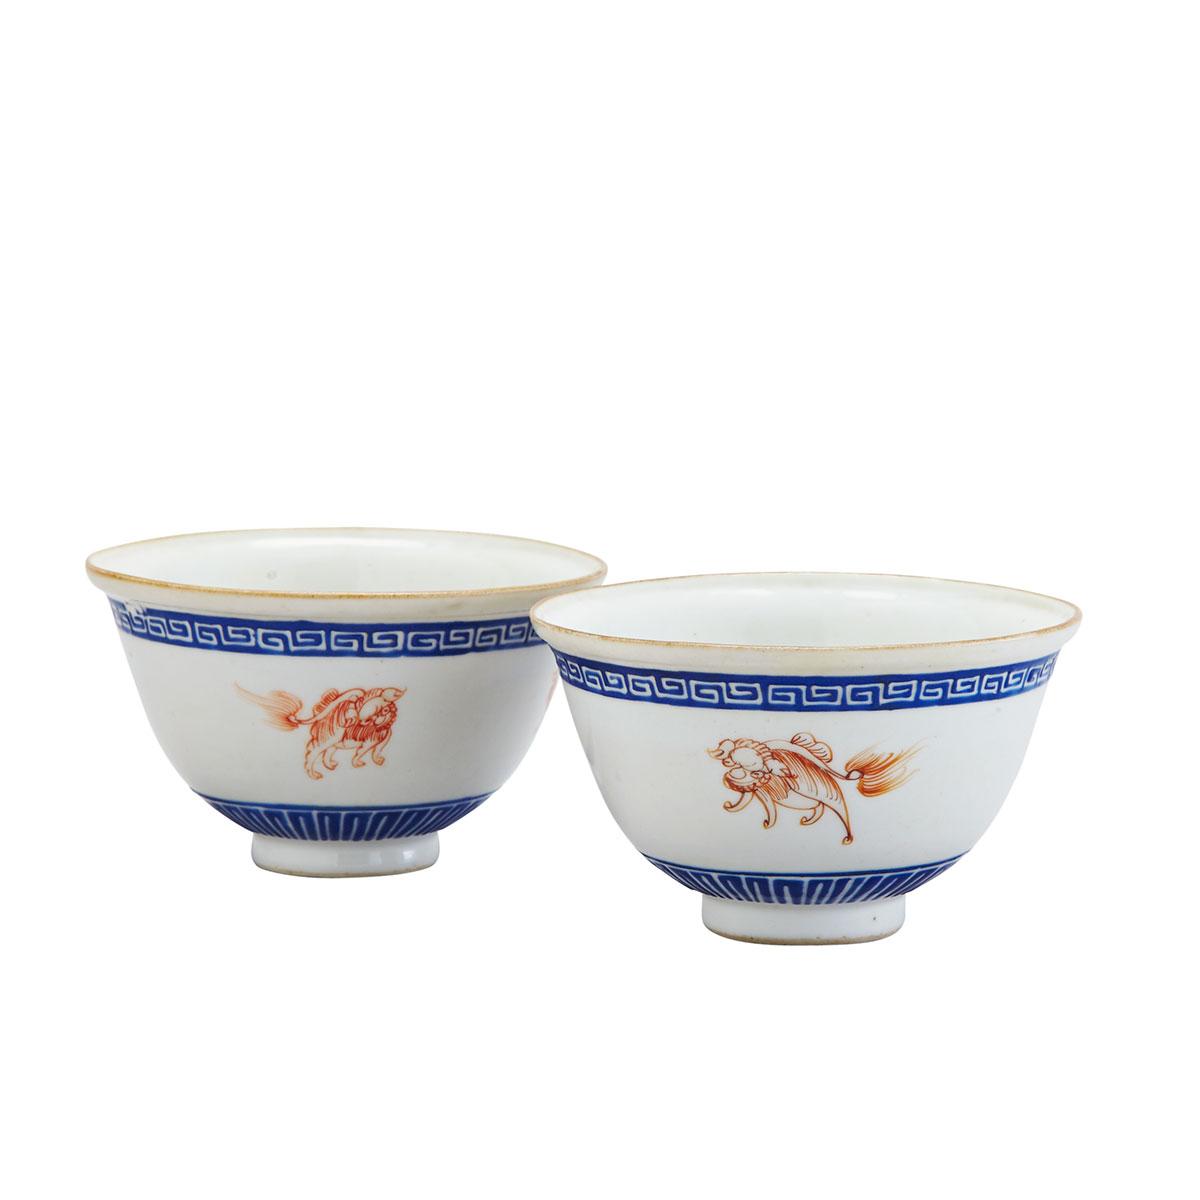 Pair of Famille Rose Tea Cups, Qianlong Mark and Period (1736-1795)